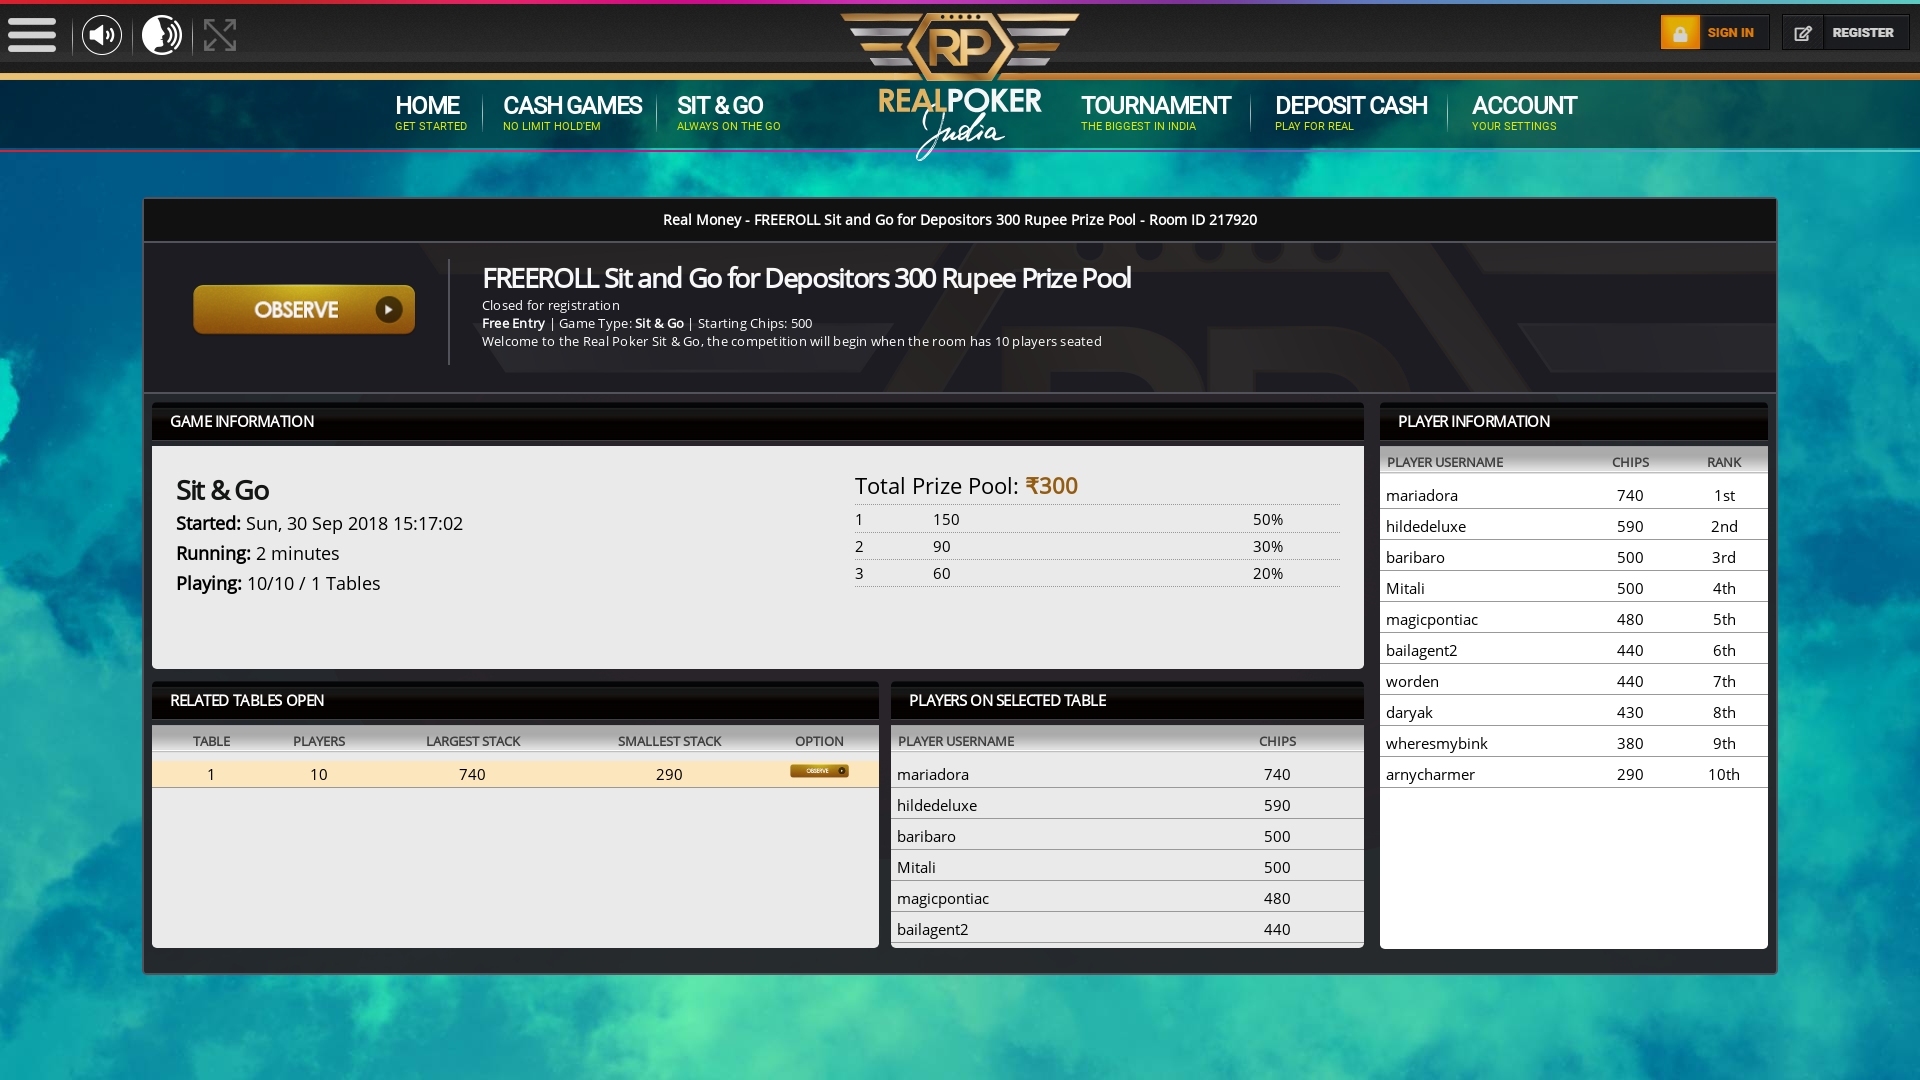 Indian online poker on a 10 player table in the 1st minute match up